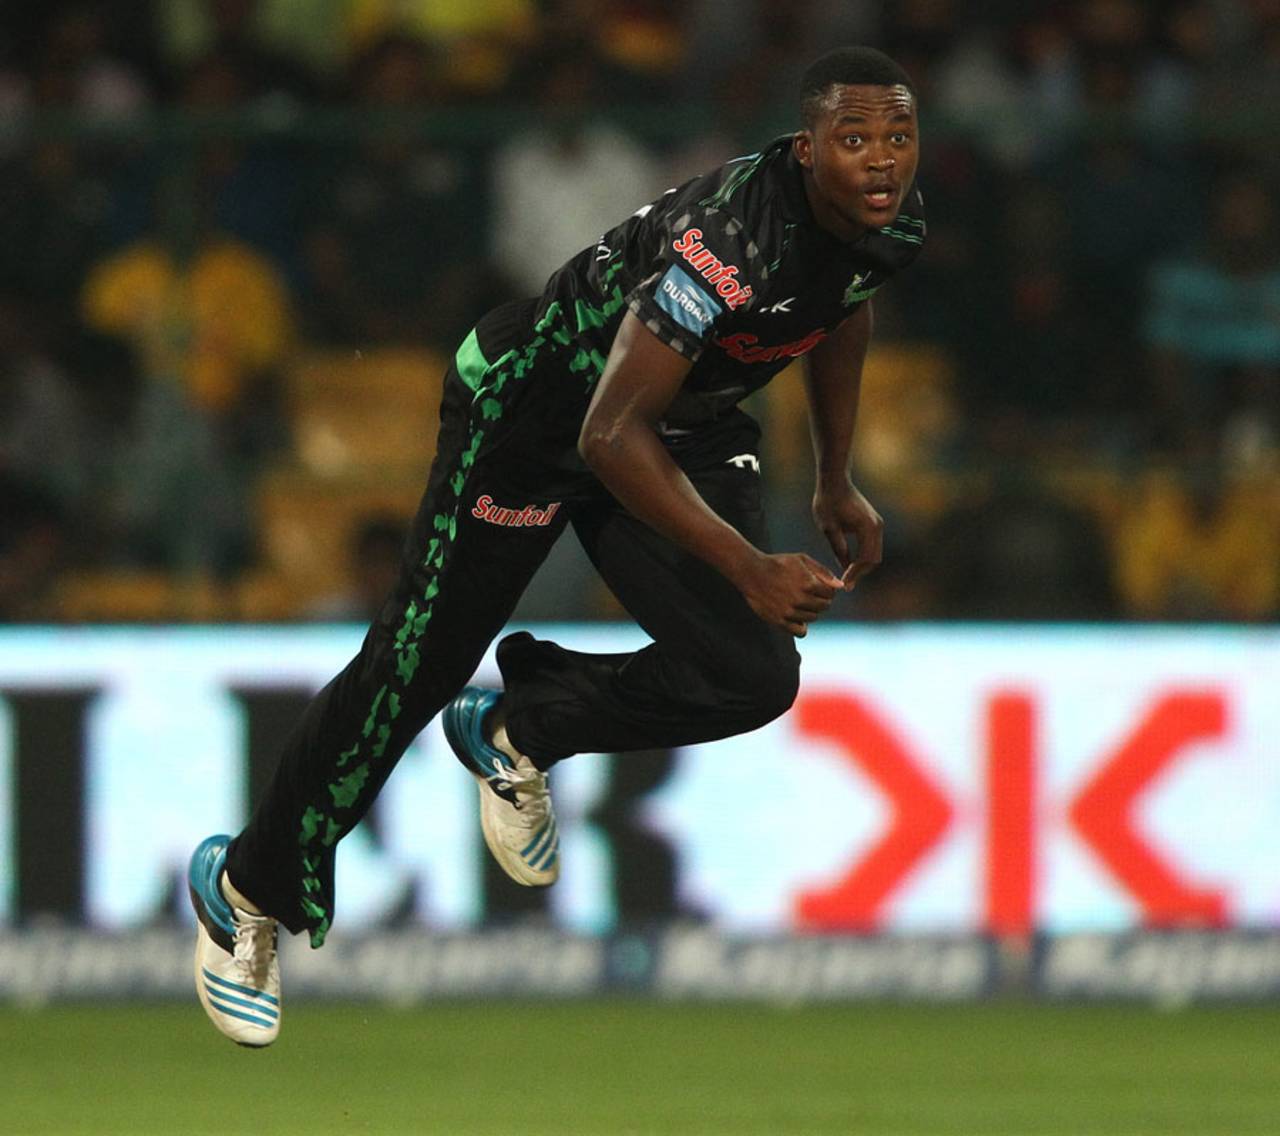 Andile Phehlukwayo hurls in a delivery, Chennai Super Kings v Dolphins, CLT20, Group A, Bangalore, September 22, 2014